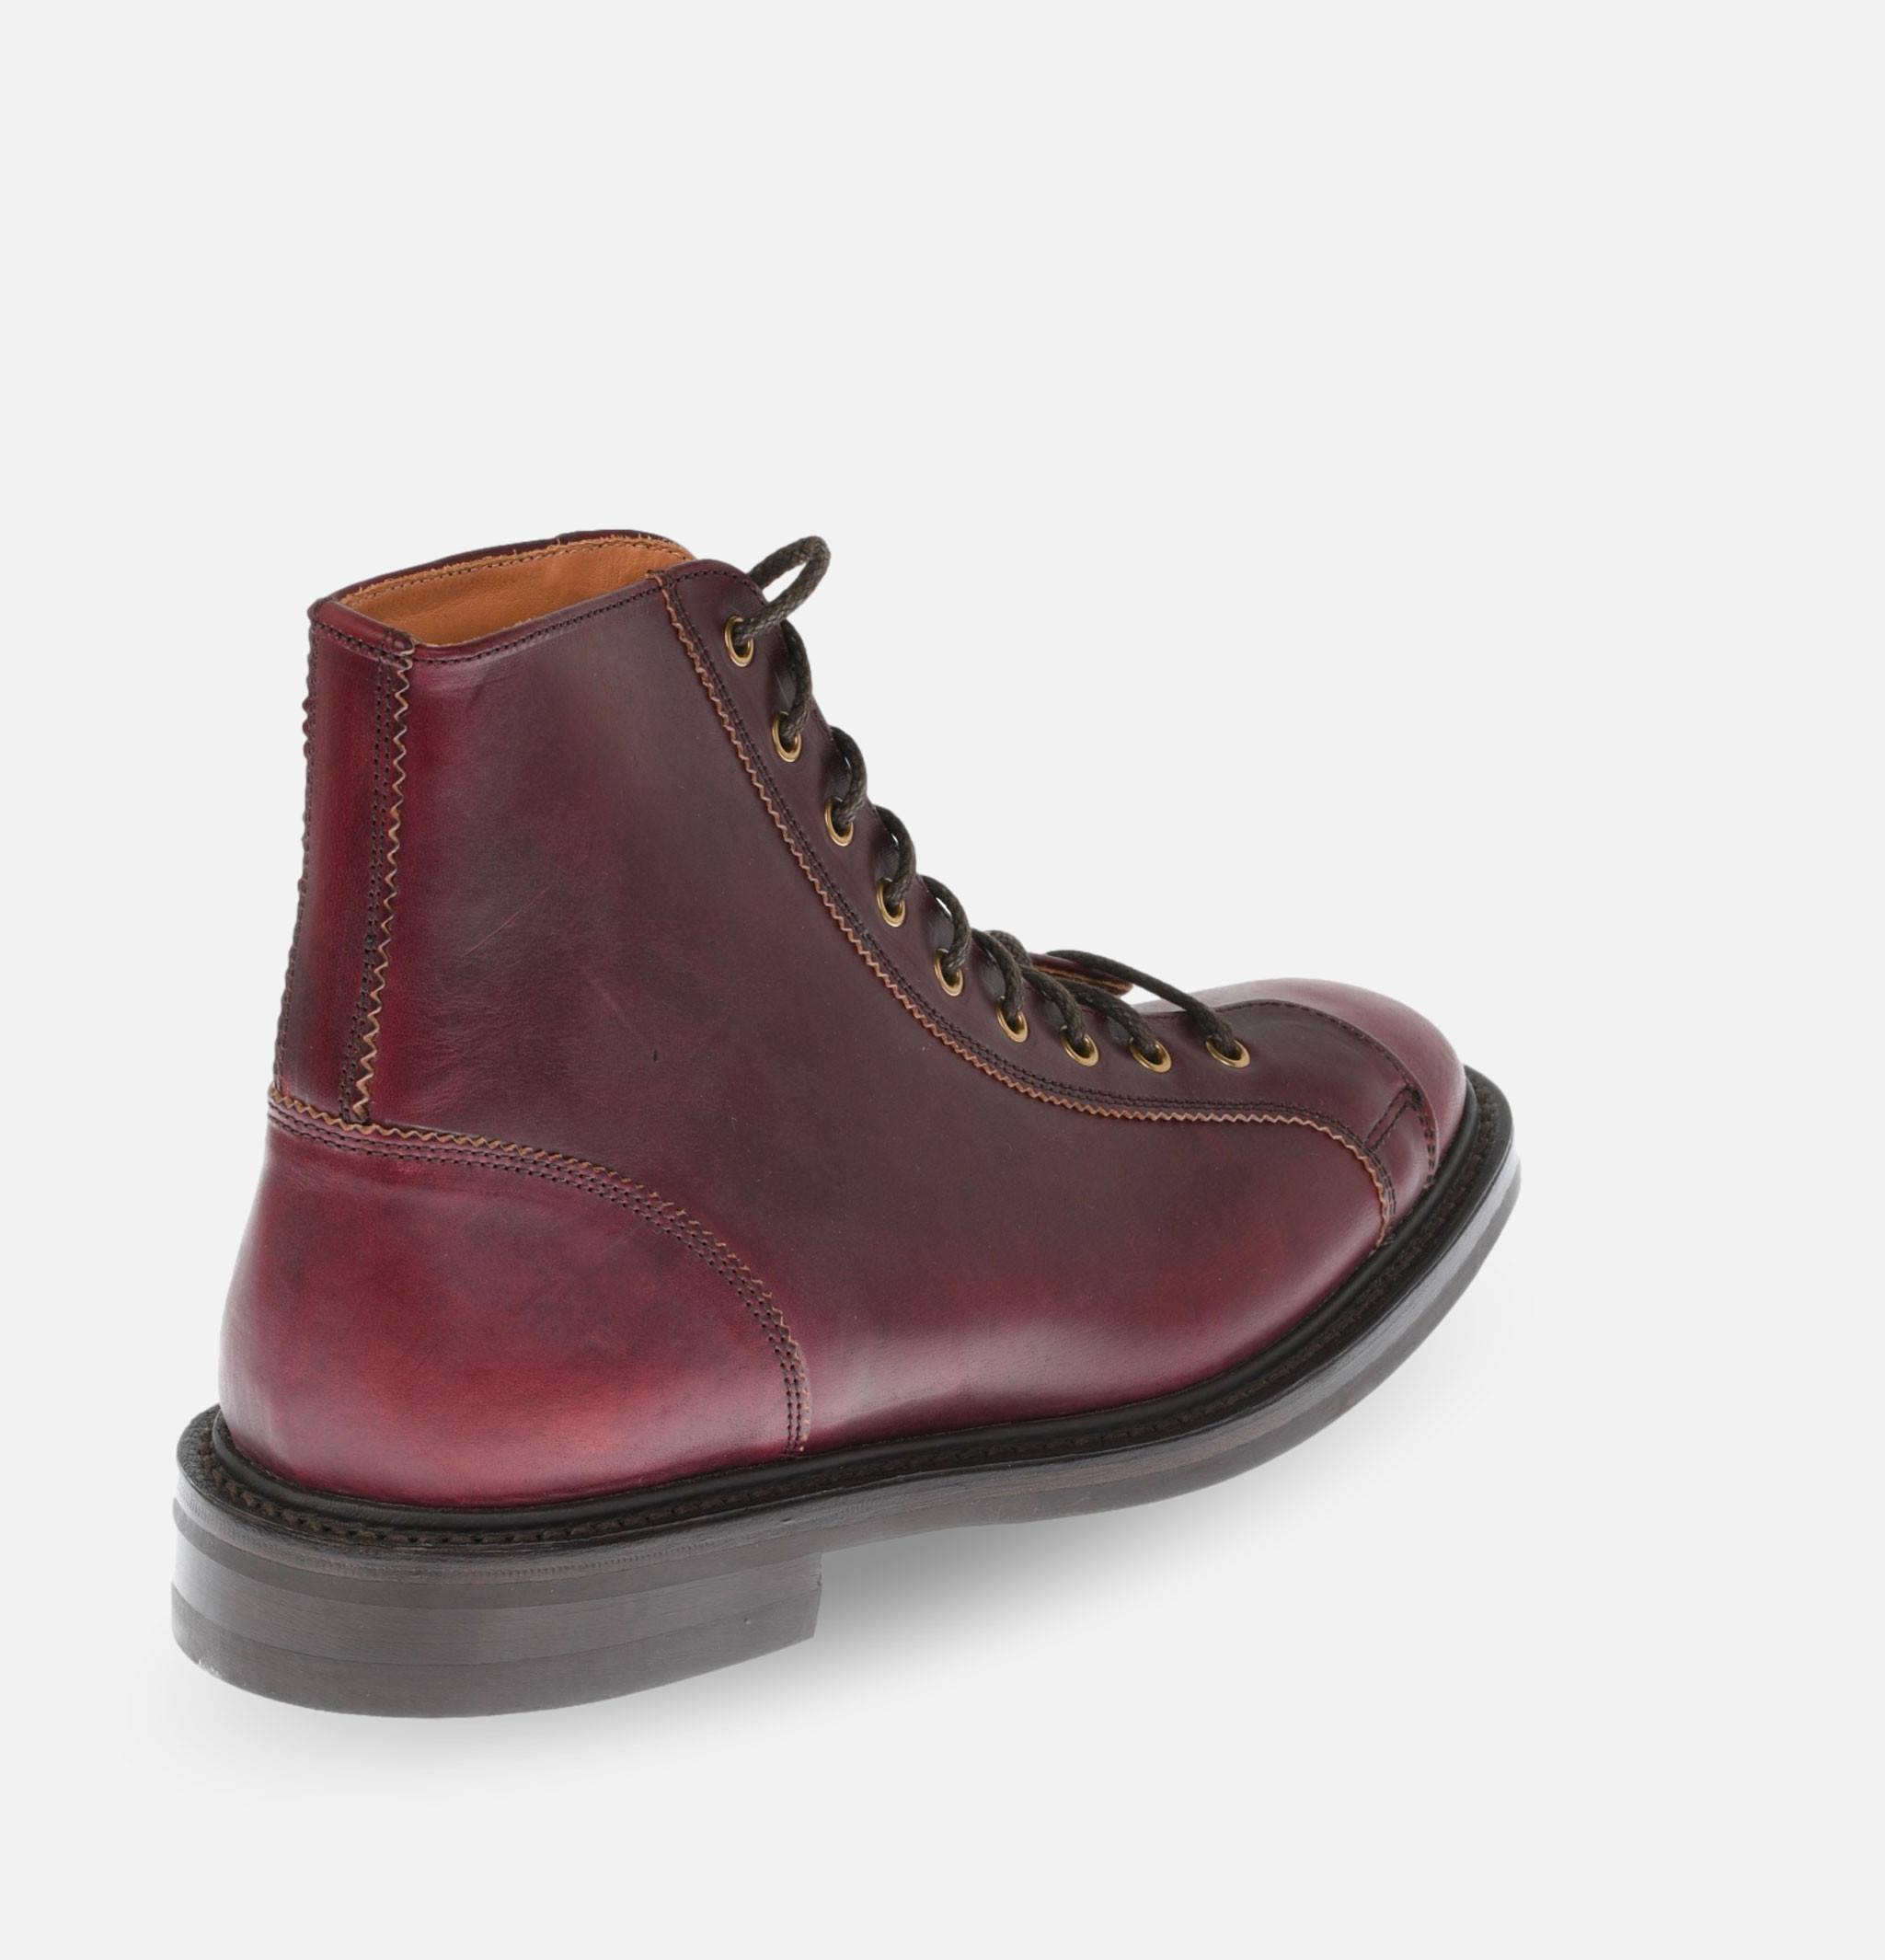 Trickers Ethan Monkey Boots No8